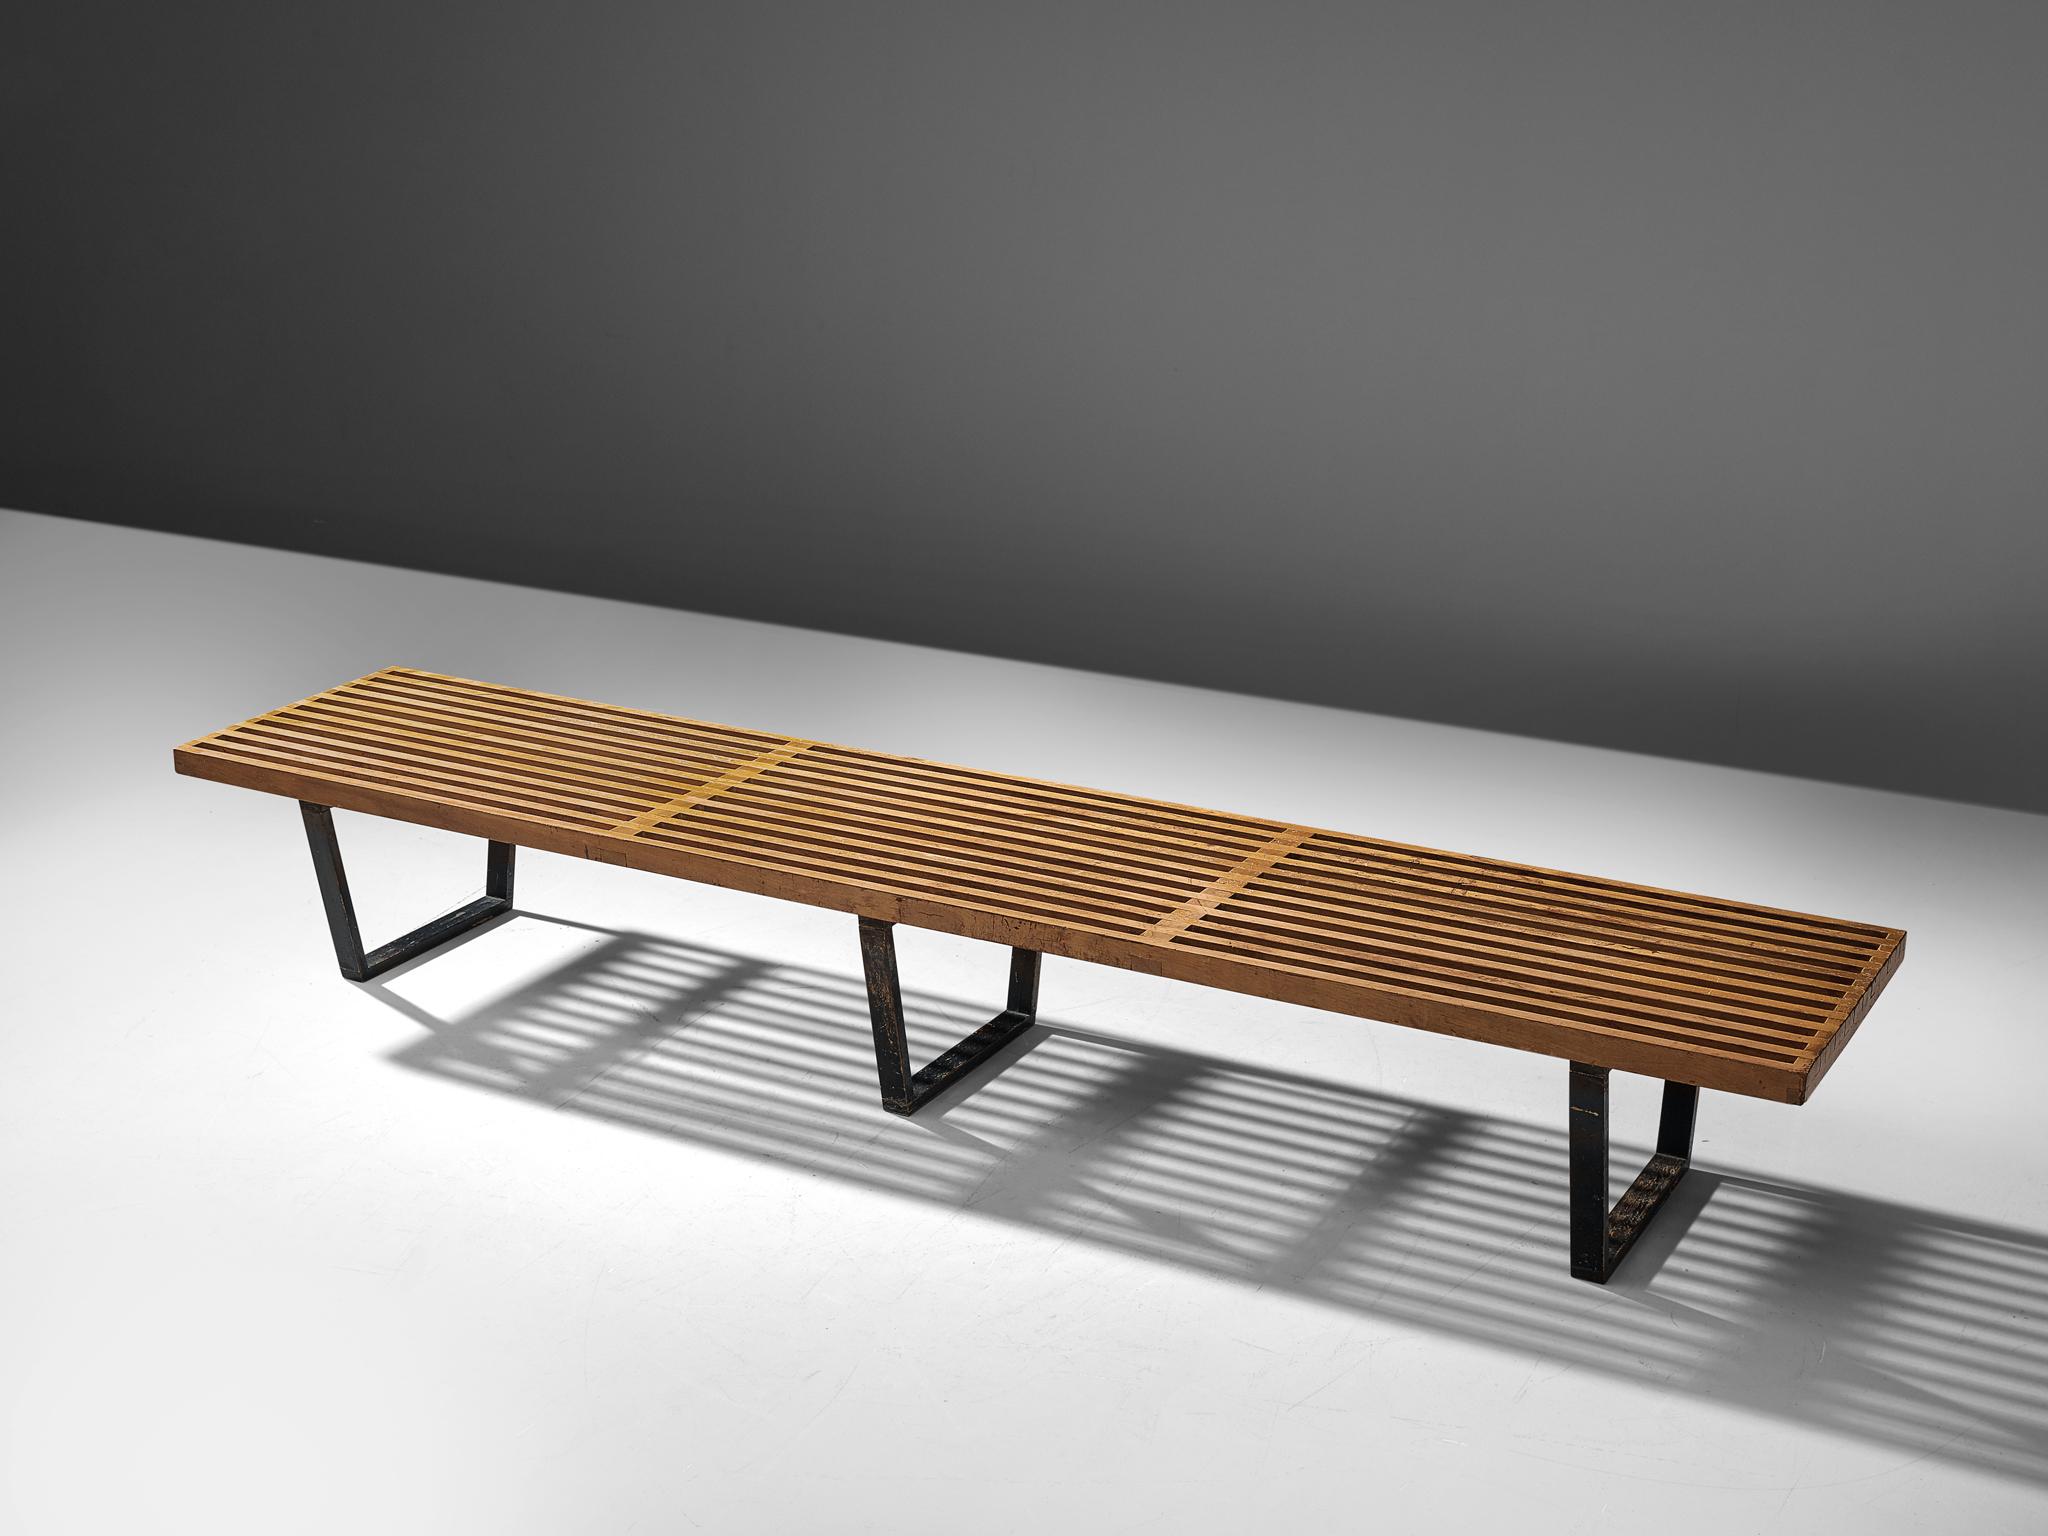 George Nelson & Associates for Herman Miller, slat bench model 4492, birch and lacquered wood, United States, 1946.

The Slat Bench was part of the first collection that George Nelson designed for Herman Miller.The top was formed by an open grid of